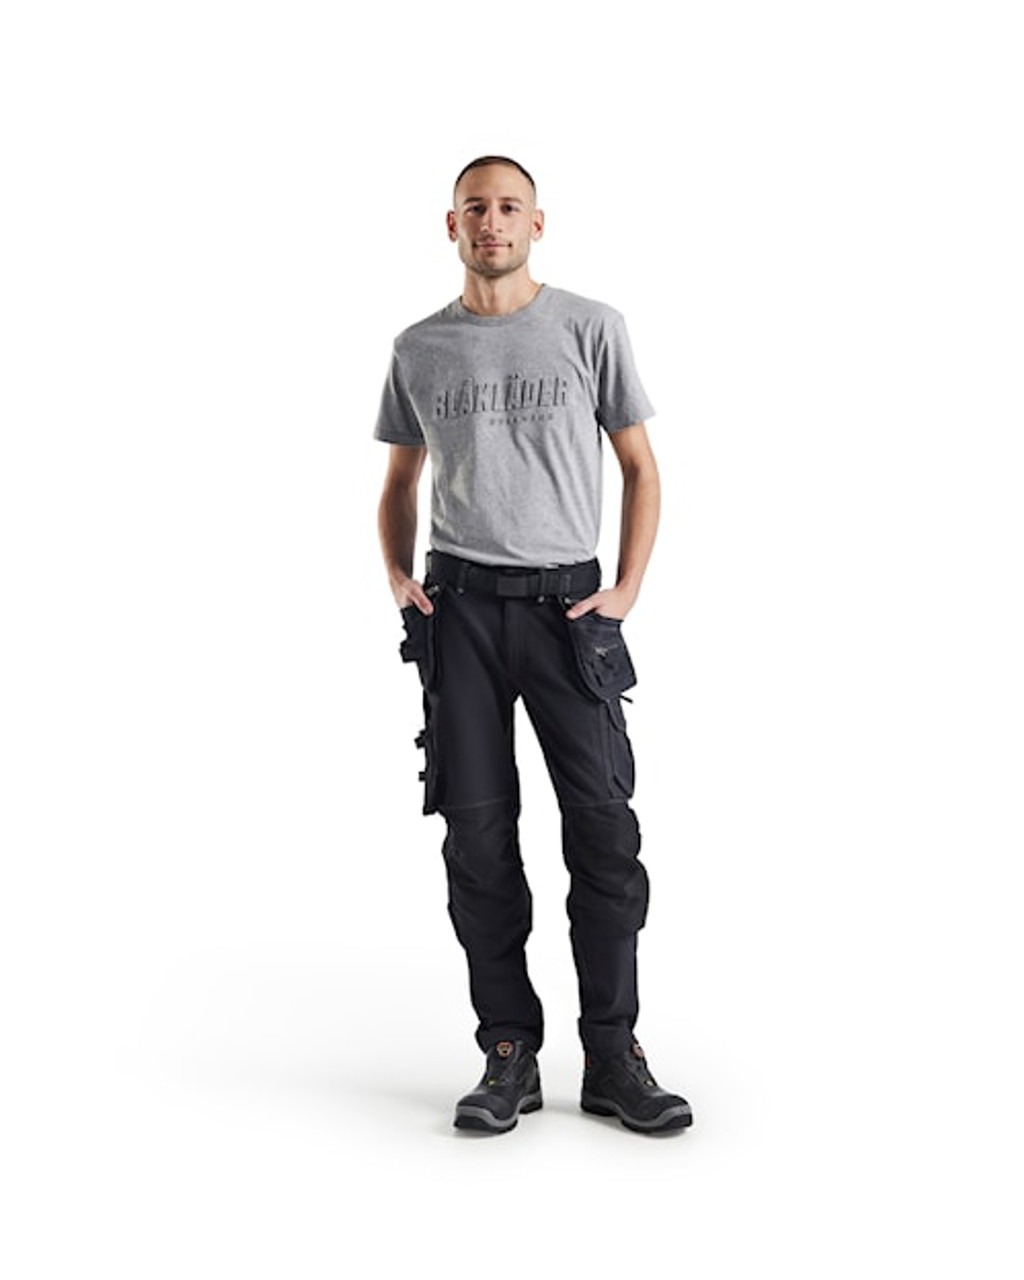 Craftsman Hardware supplies BLAKLADER Euro workwear range including Trousers with Holster Pockets for the Carpenters, Steelfixers in areas like Sydney